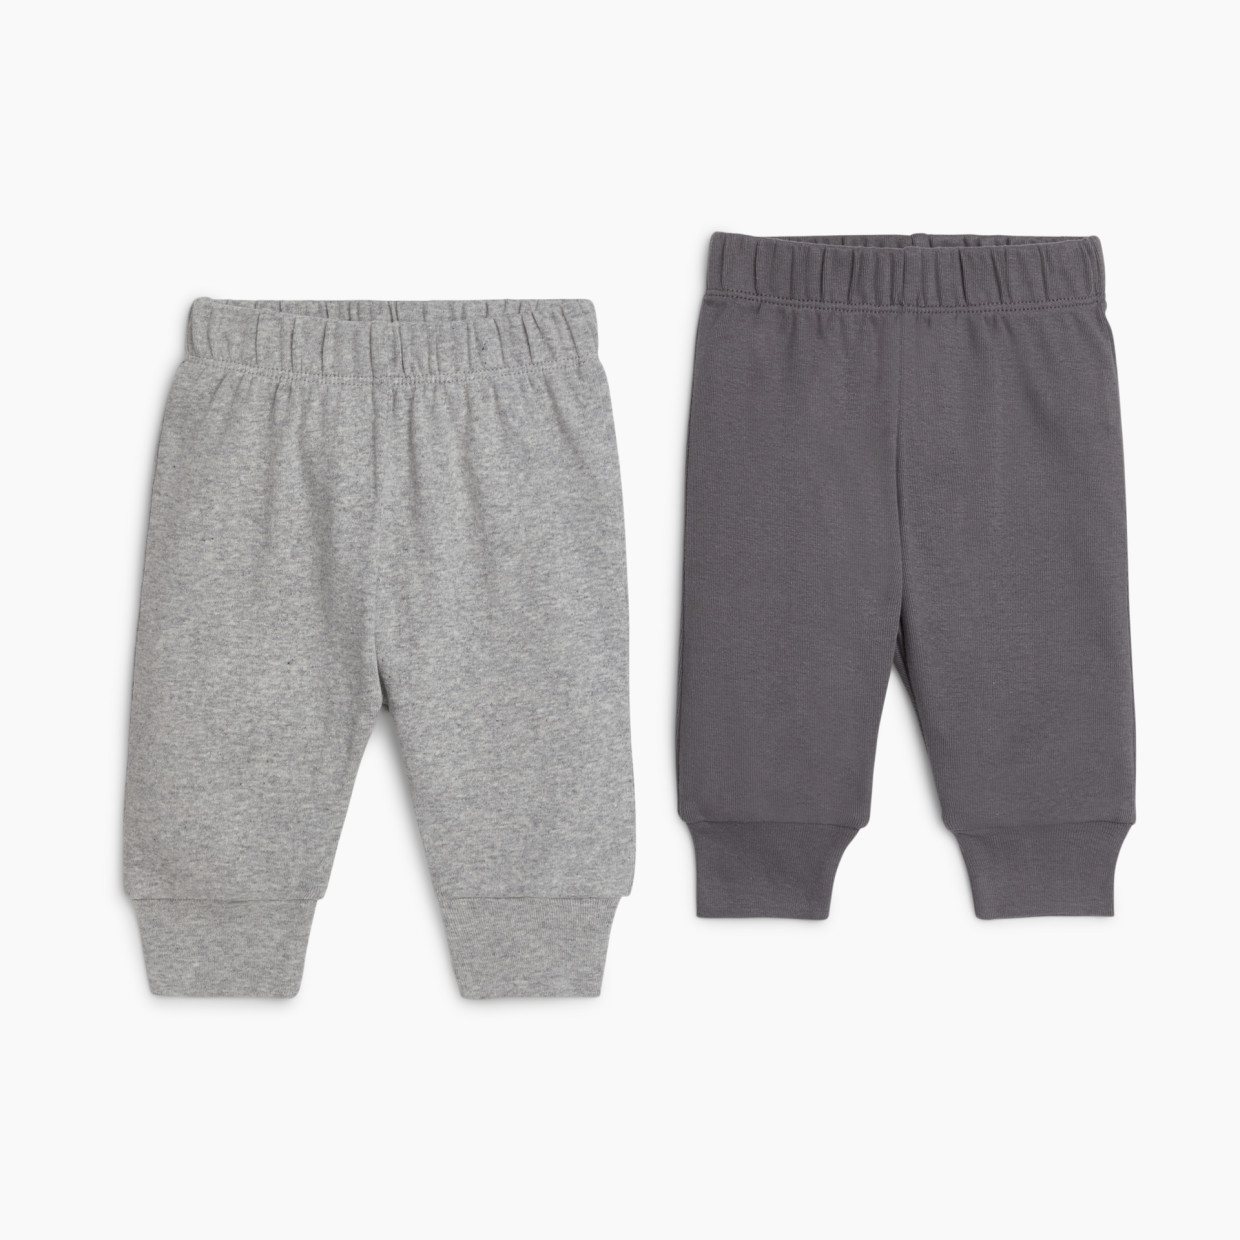 Small Story Pants (2 Pack) - Heather Grey/Charcoal, Nb.